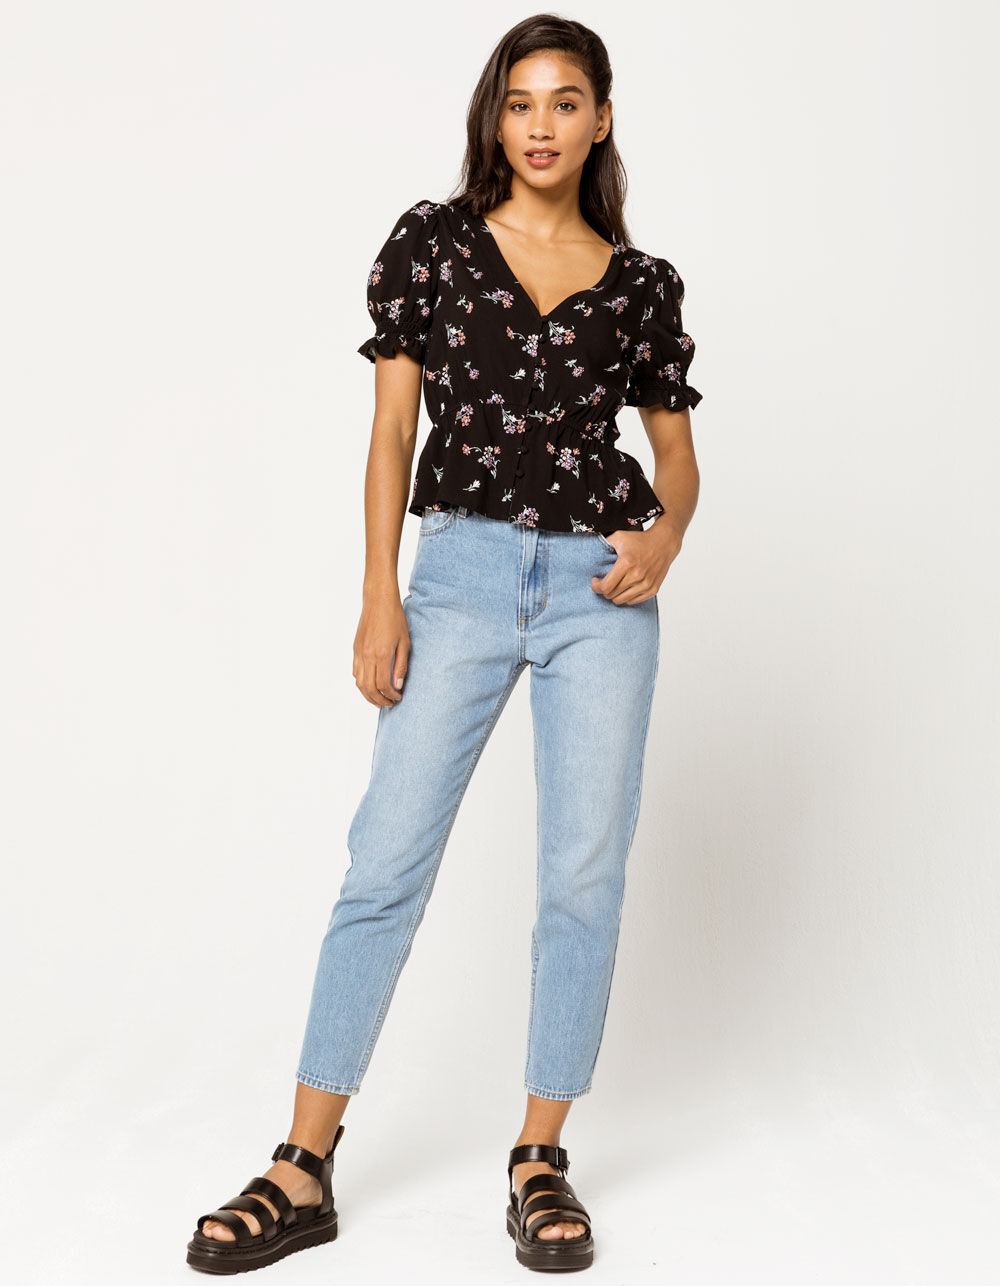 MIMI CHICA Button Front Peplum Womens Peasant Top - BLACK COMBO | Tillys